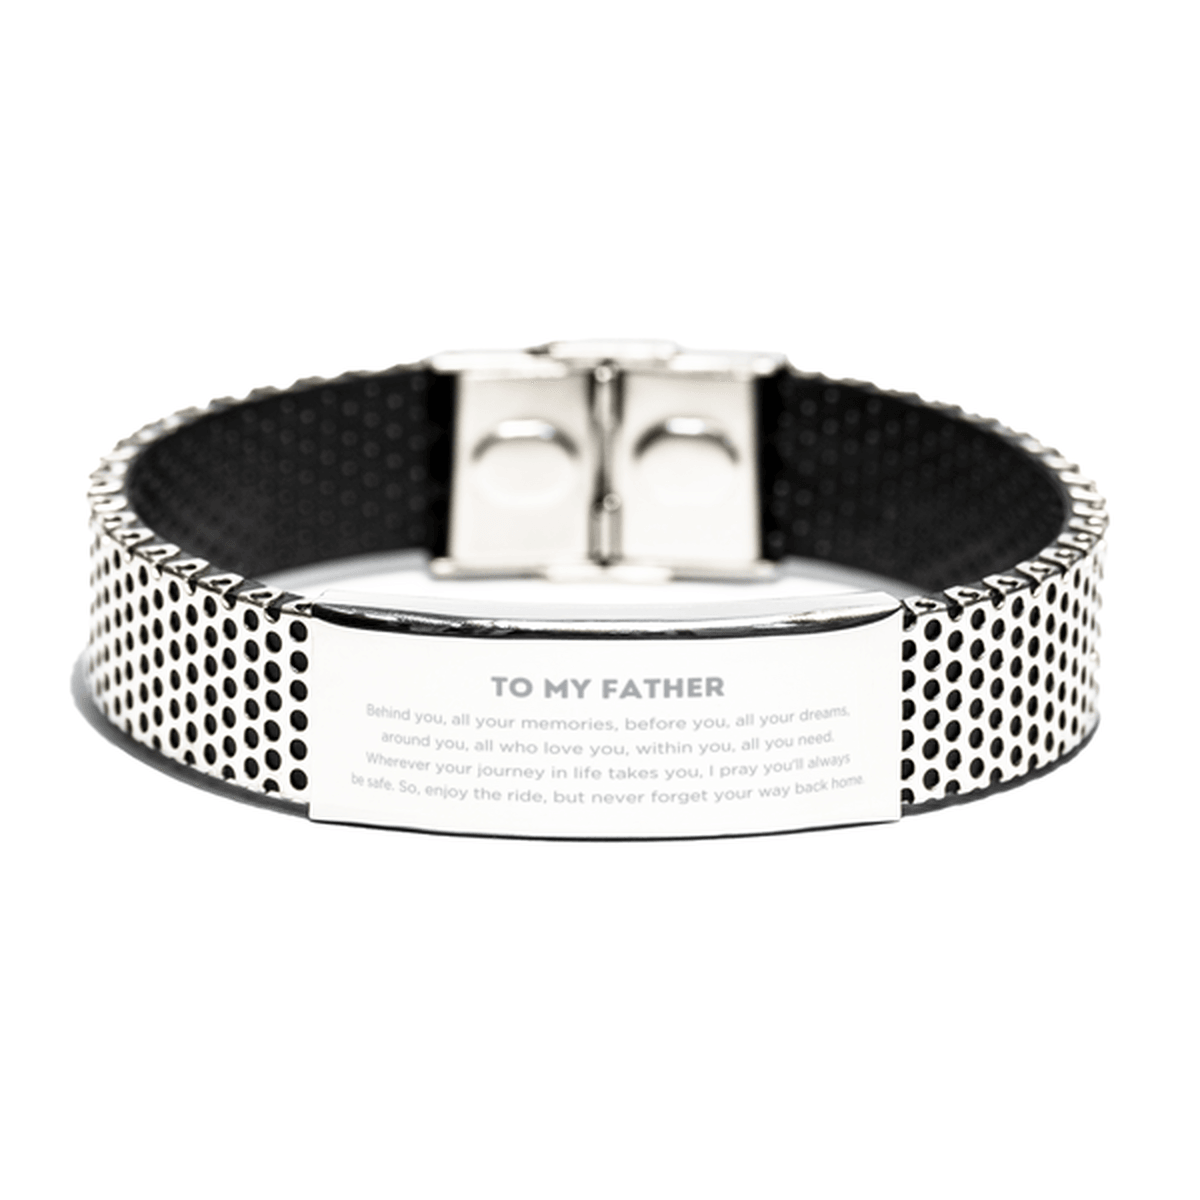 To My Father Gifts, Inspirational Father Stainless Steel Bracelet, Sentimental Birthday Christmas Unique Gifts For Father Behind you, all your memories, before you, all your dreams, around you, all who love you, within you, all you need - Mallard Moon Gift Shop